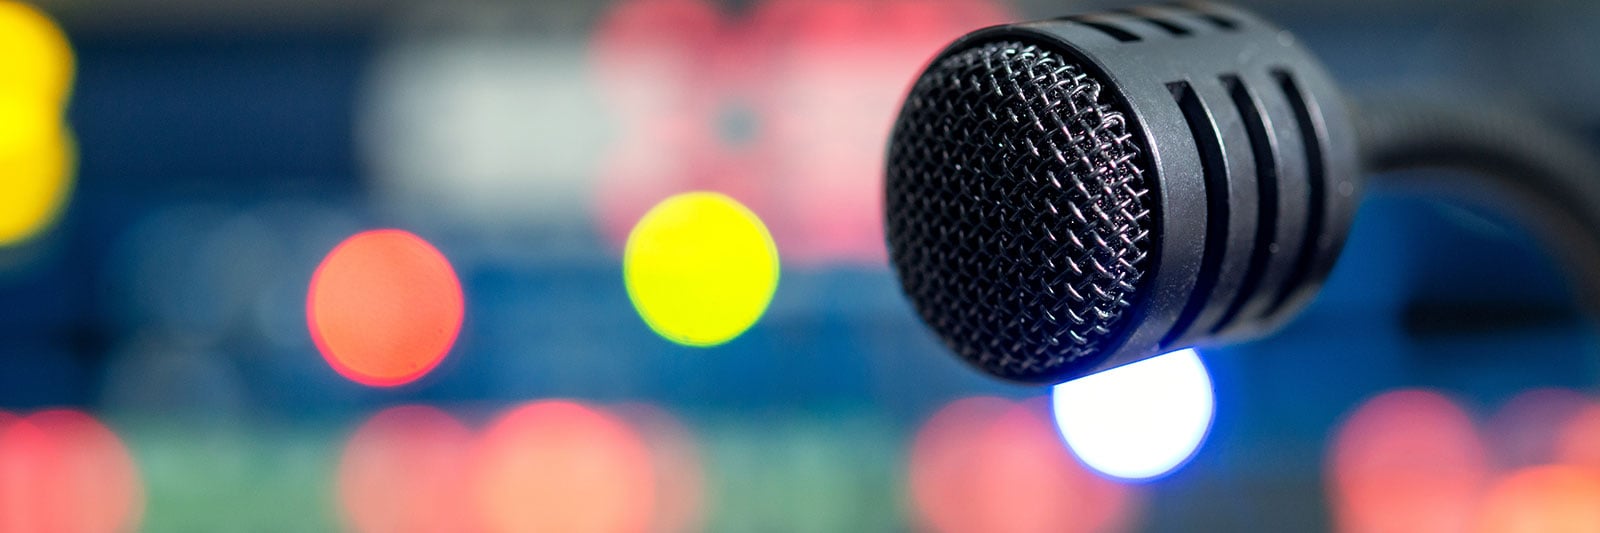 Close up of a microphone with multicolored lights out of focus in the background